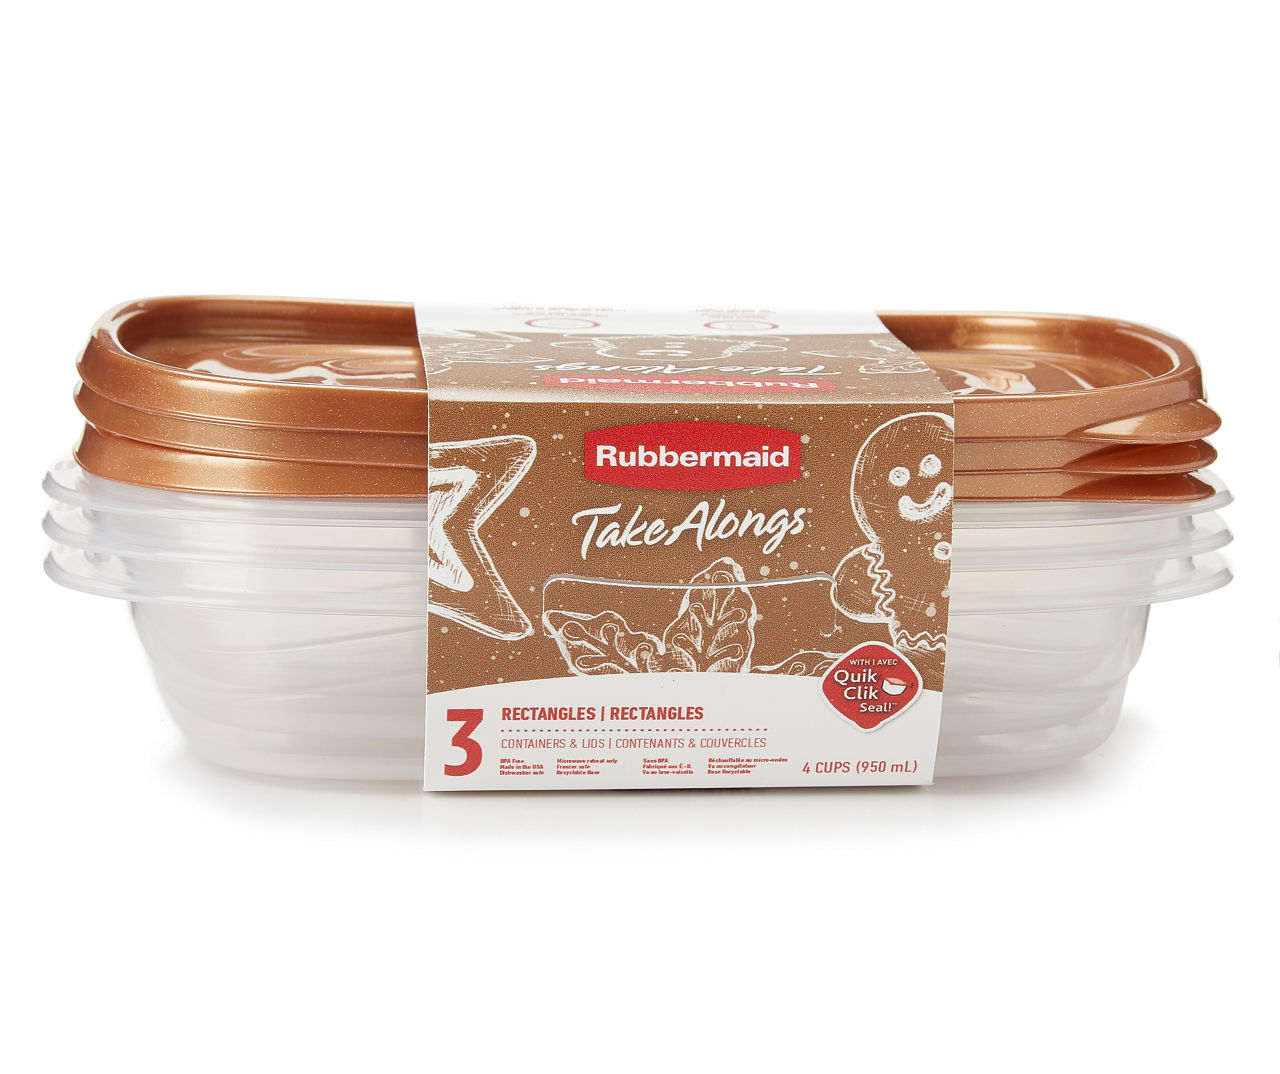 TakeAlongs Toffee Nut 5.2 Cup Deep Squares Containers, 4-Pack